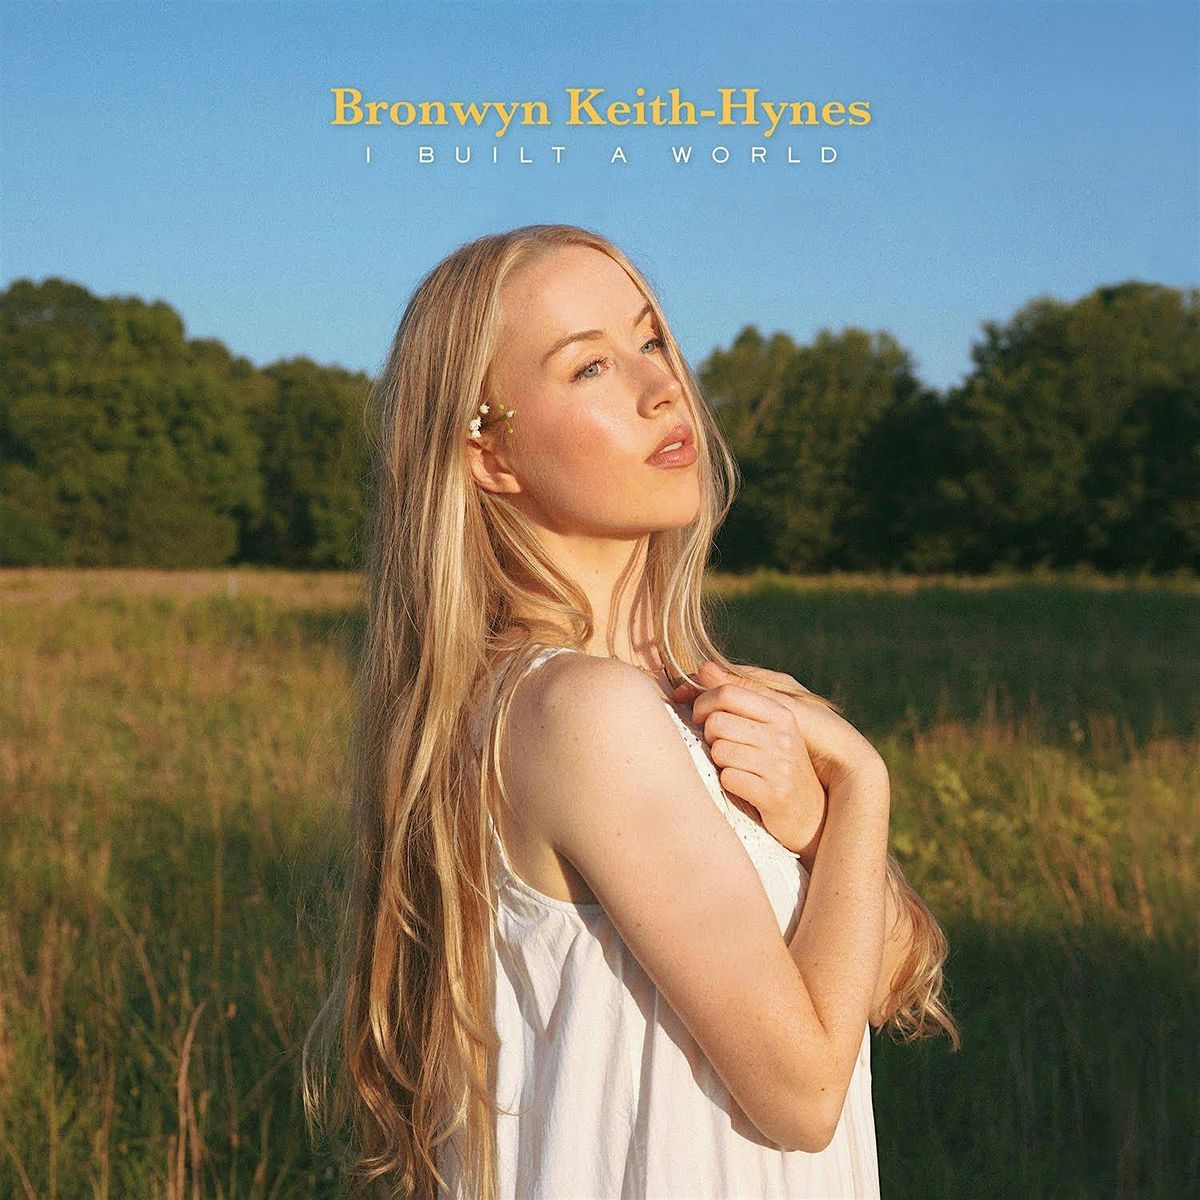 Bronwyn Keith-Hynes "I Built A World" Tour with support from Josh Coffey